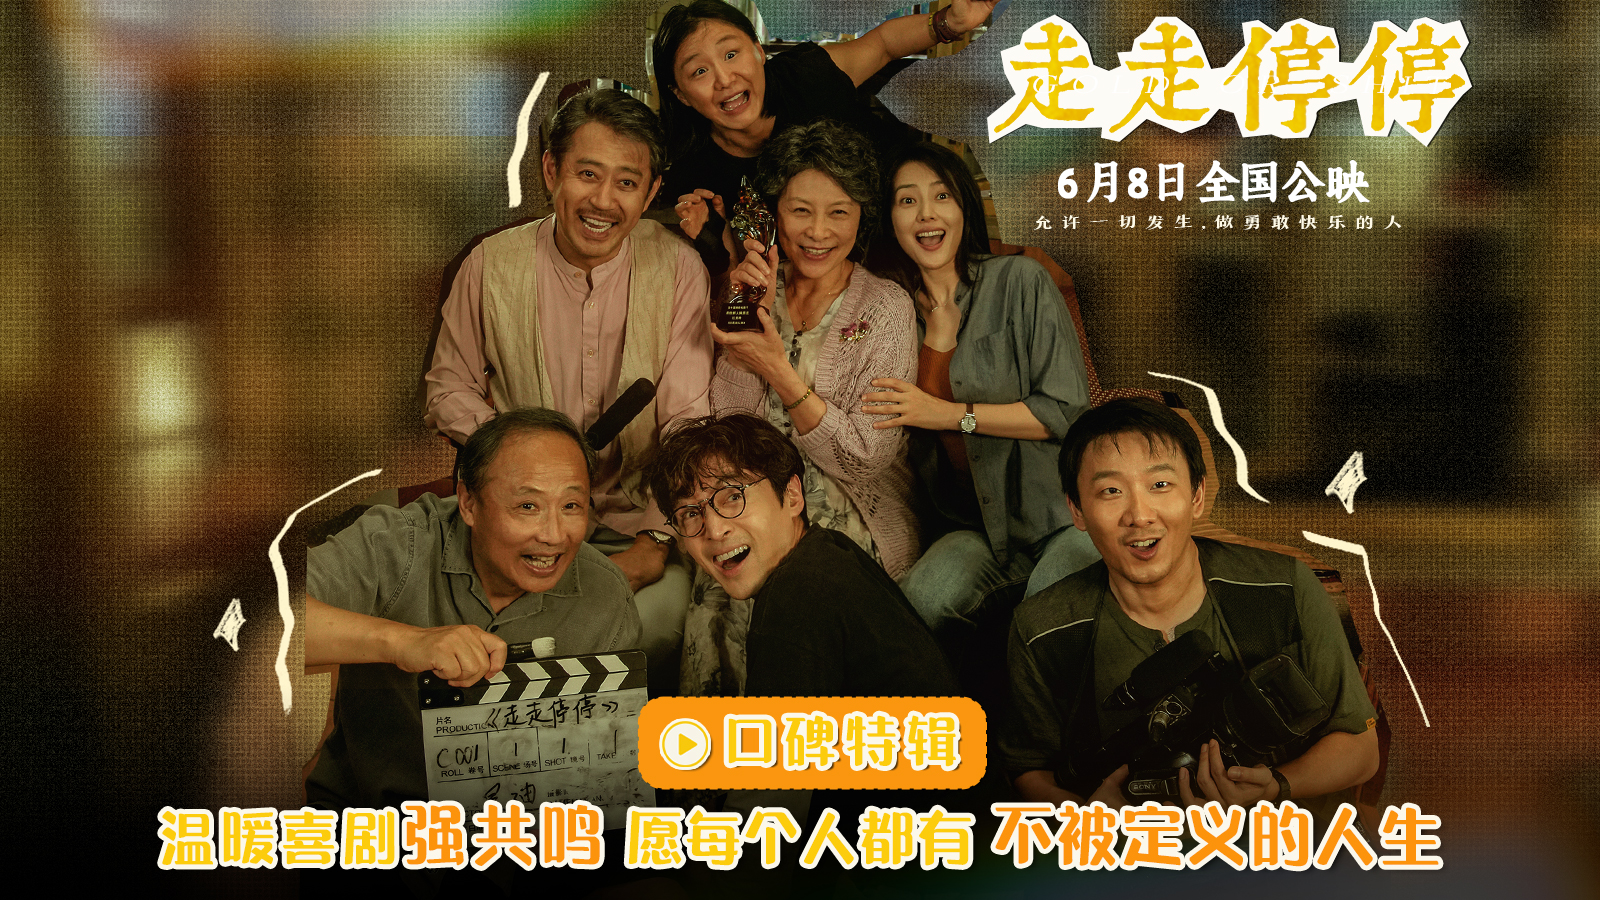  Dragon Boat Festival's highly acclaimed comedy Stop and Go released a special series of public praise. Anti anxiety and anti internal friction lead to an undefined life